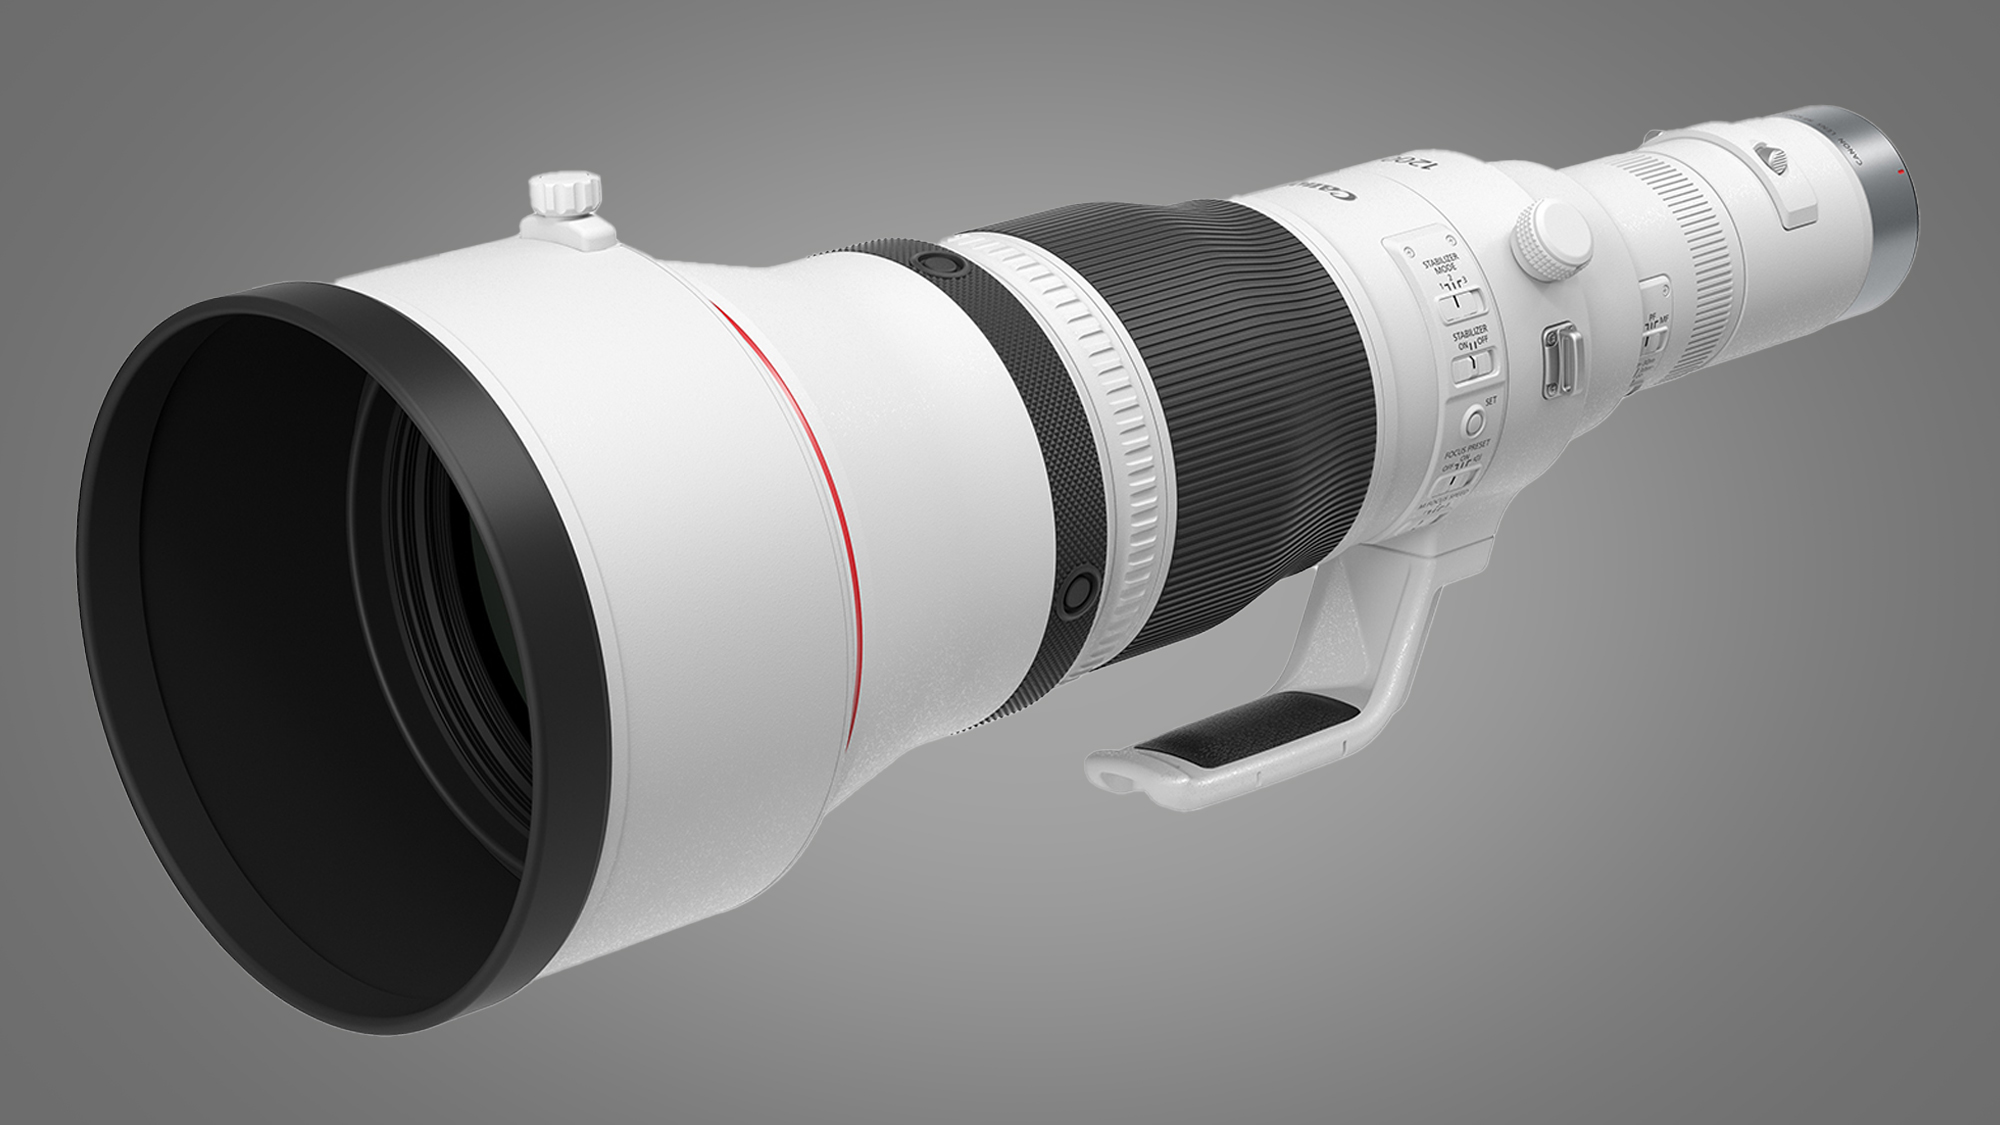 Canon's new take on world's longest telephoto lens costs more than a car